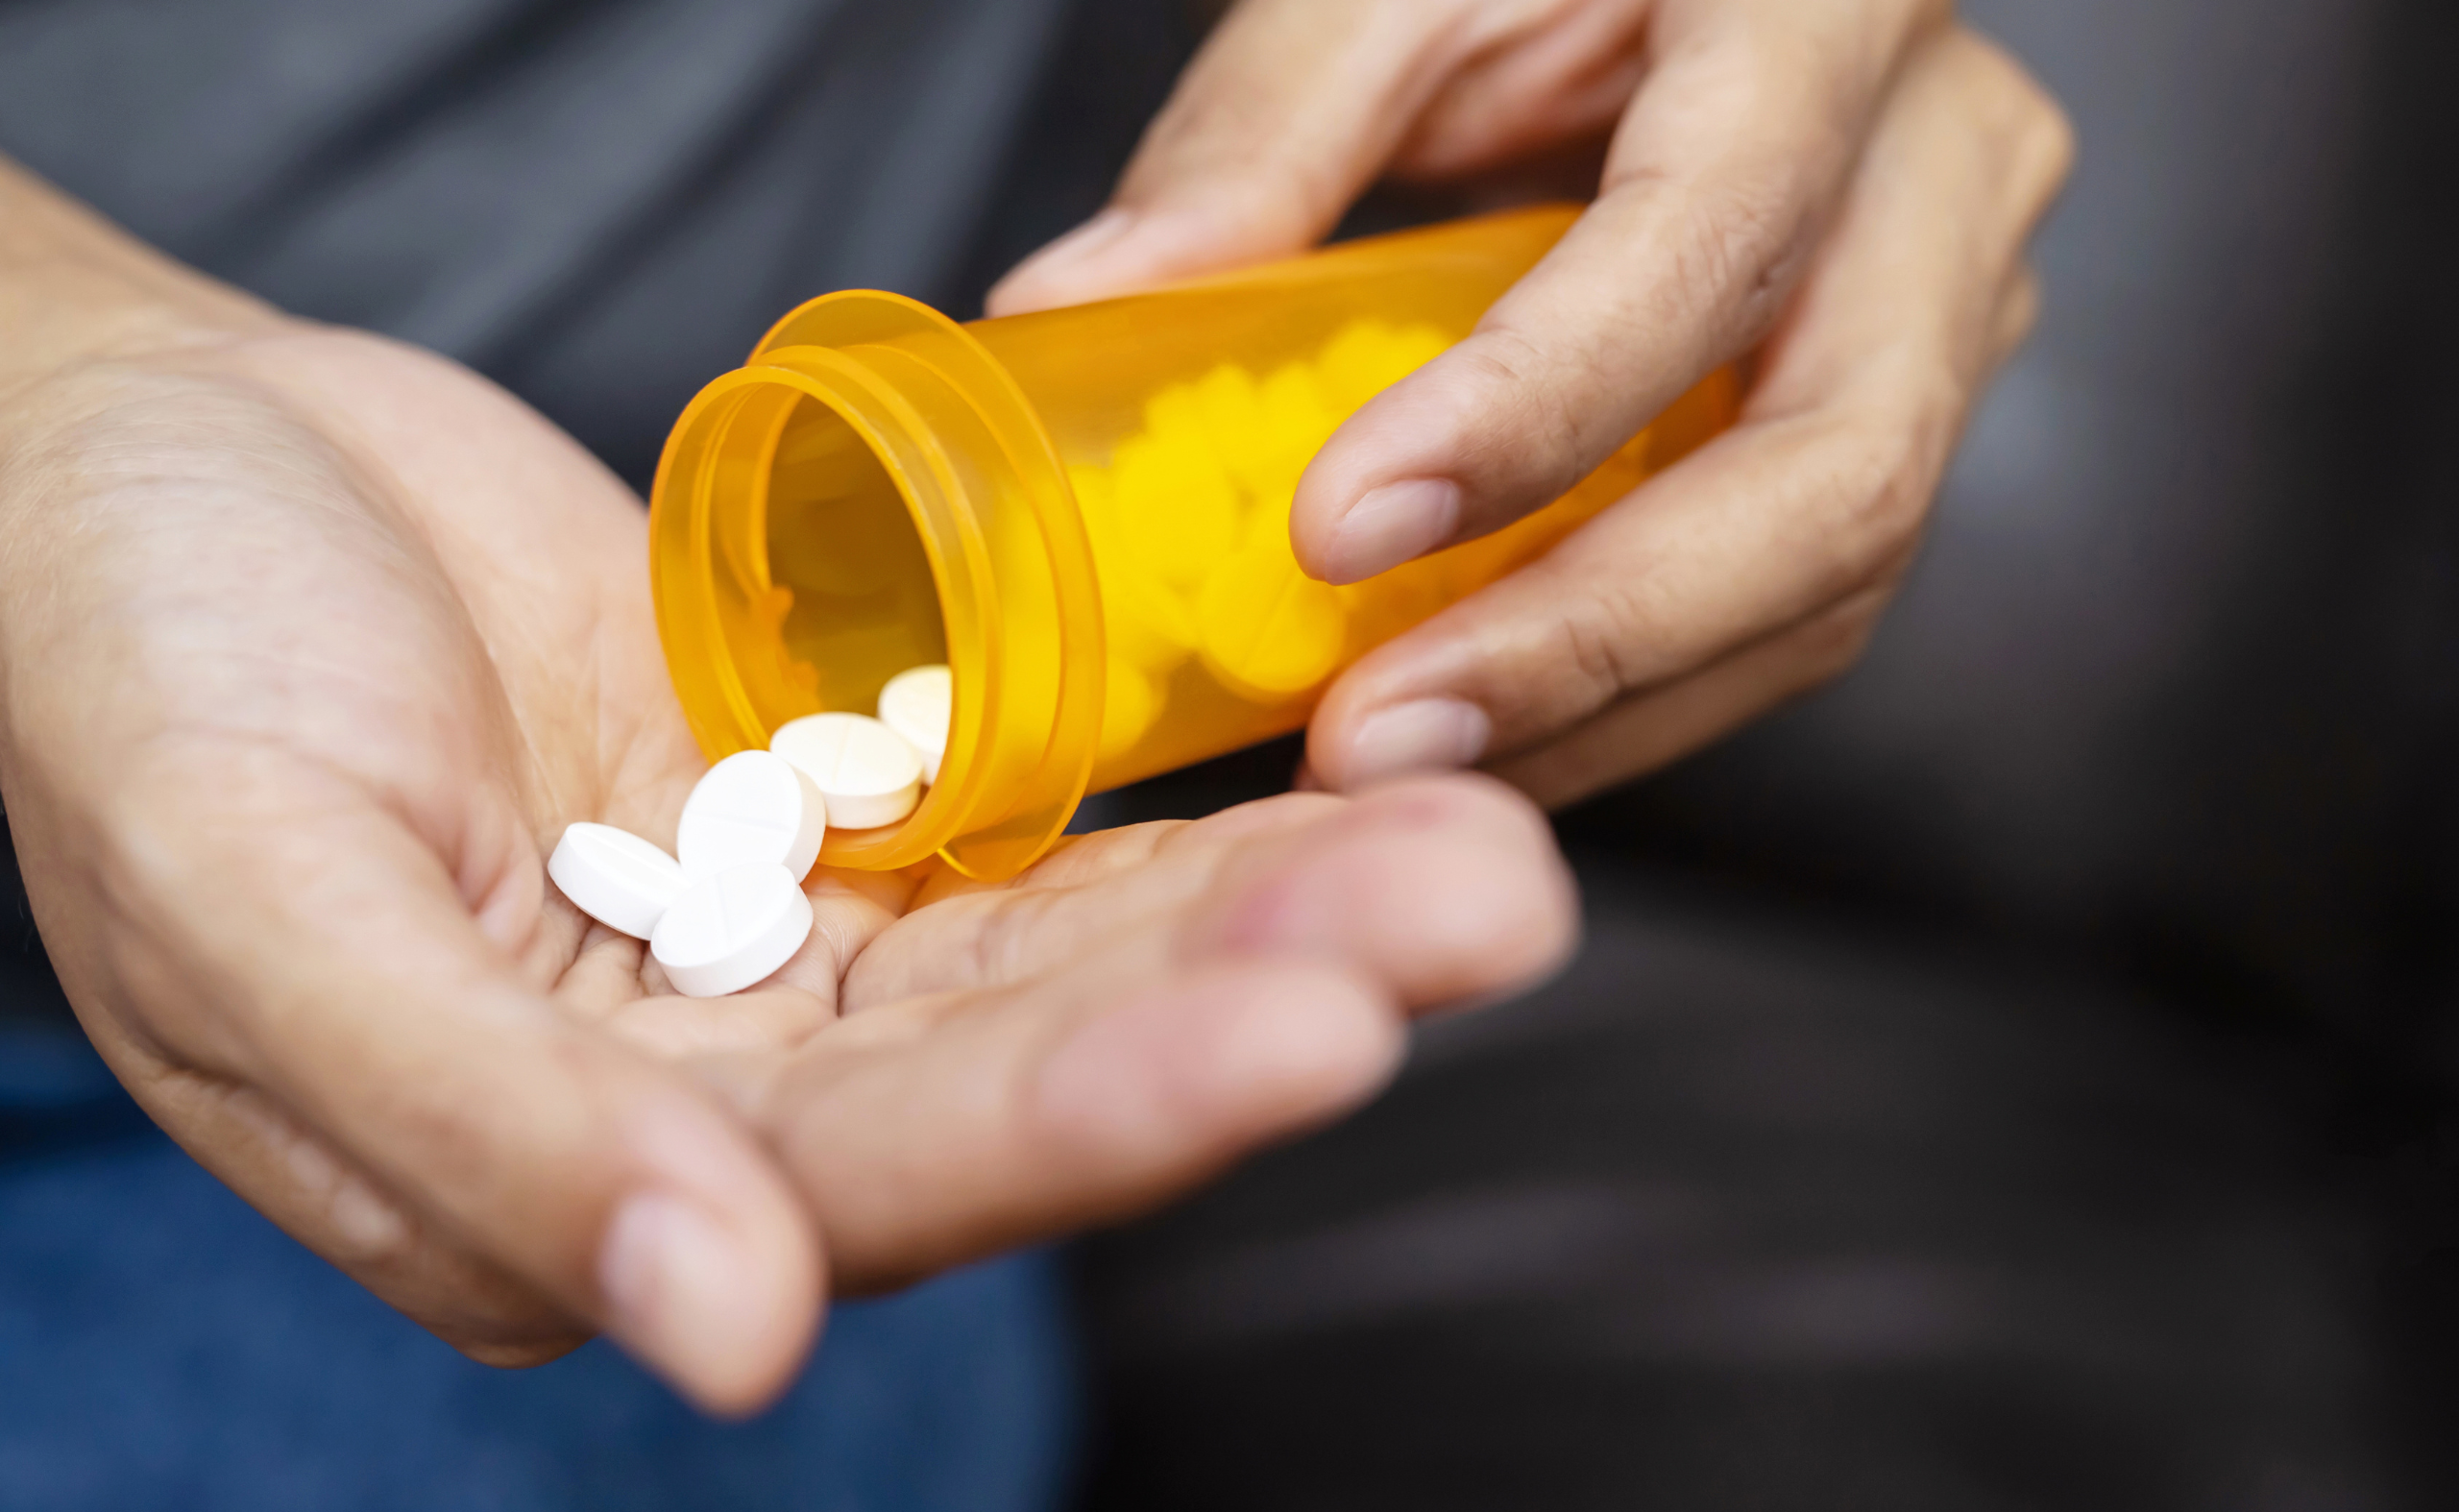 Medication for Mental Health: 5 questions you might be asking.